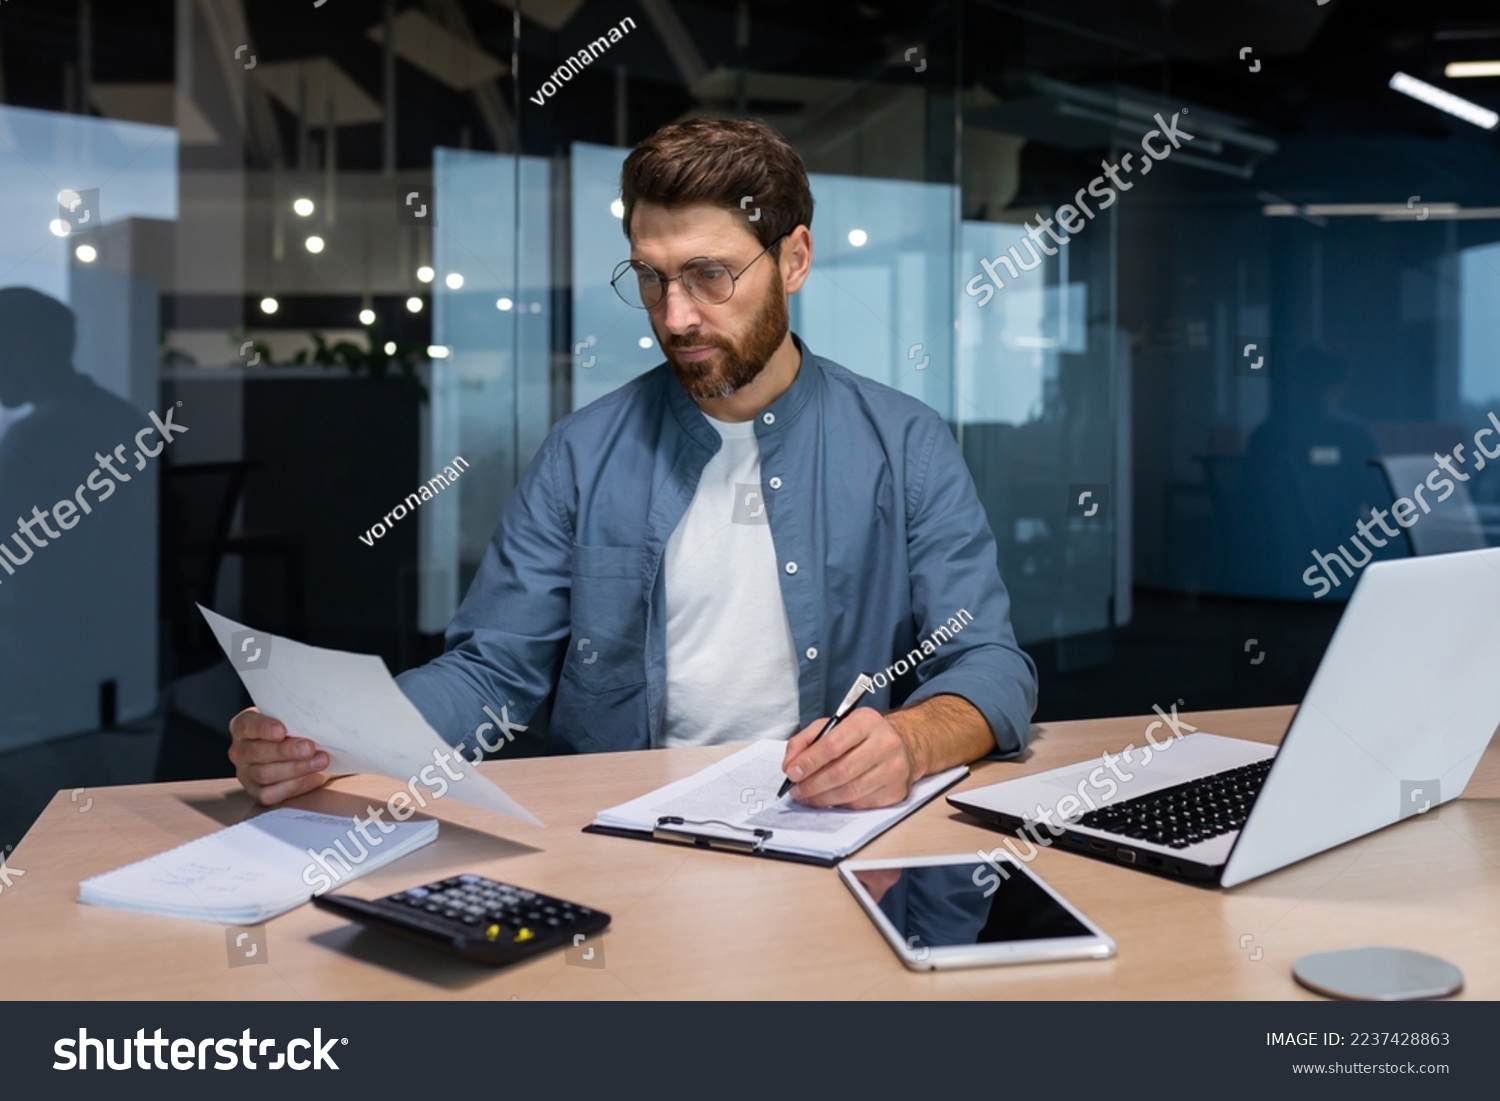 Serious and focused financier accountant on paper work inside office, mature man using calculator and laptop for calculating reports and summarizing accounts, businessman at work in casual clothes. #2237428863